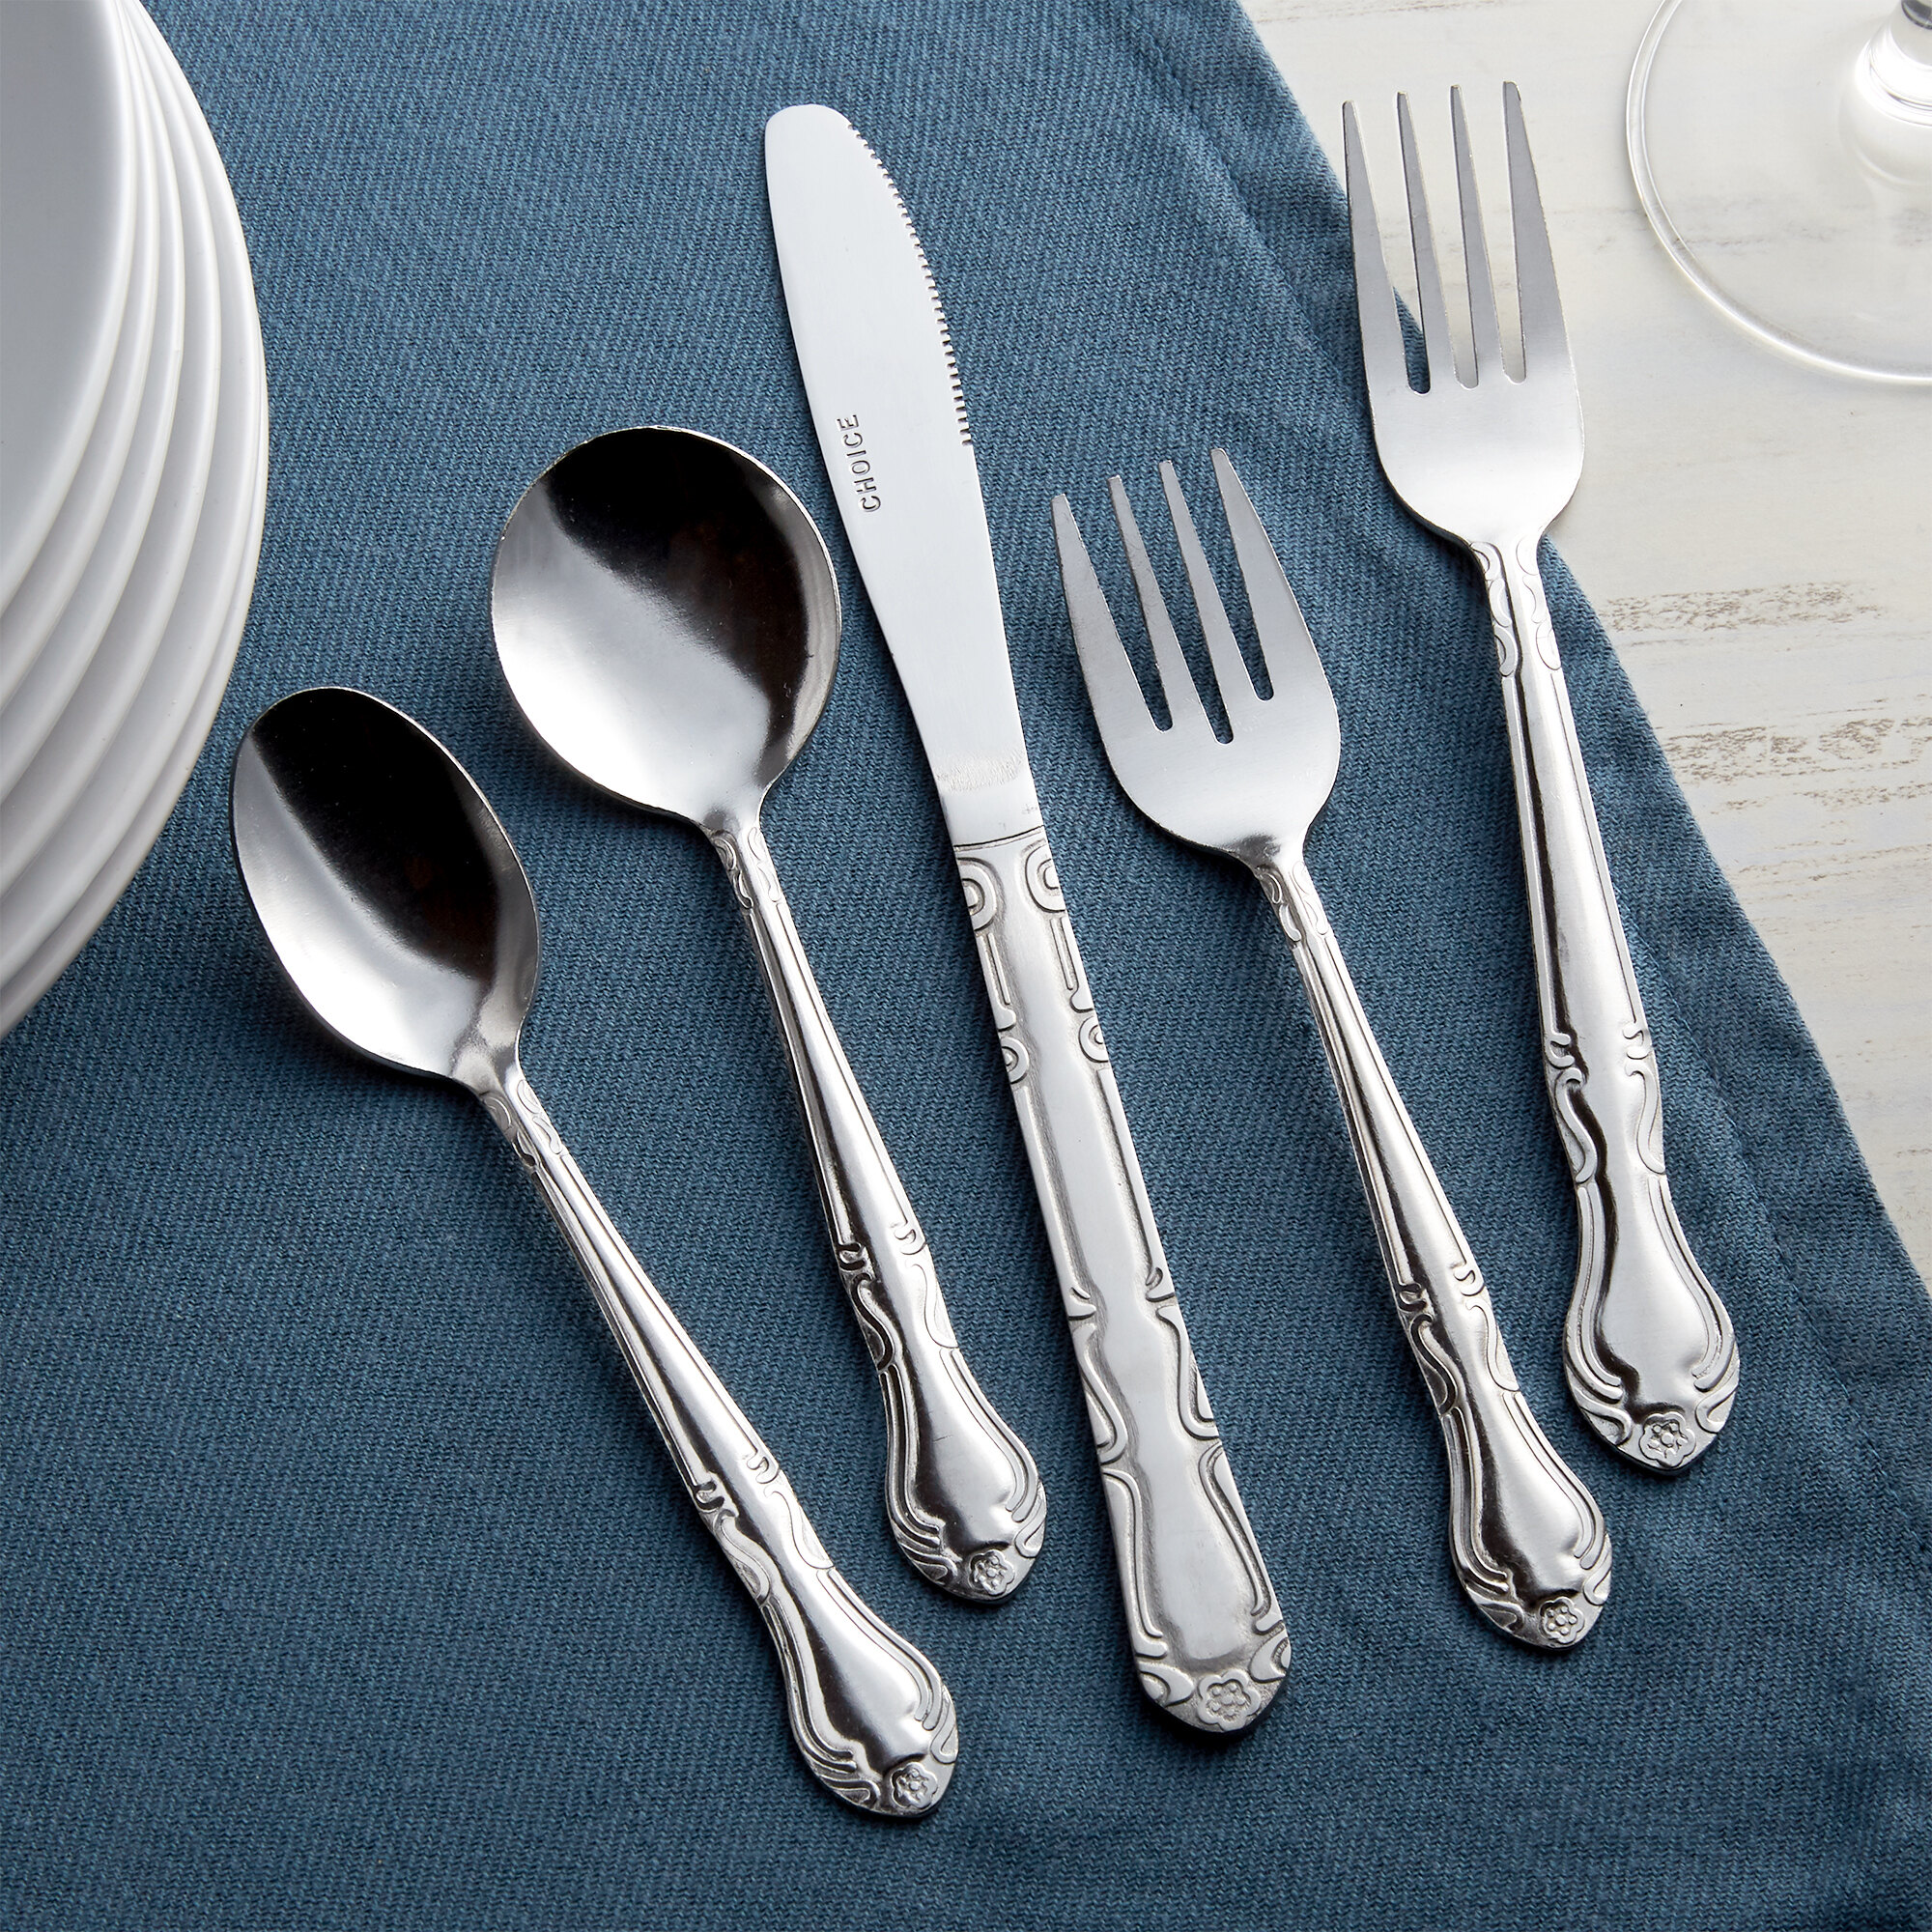 Choice Bethany 18/0 Stainless Steel Flatware Set with Service for 12 18 0 Stainless Steel Silverware